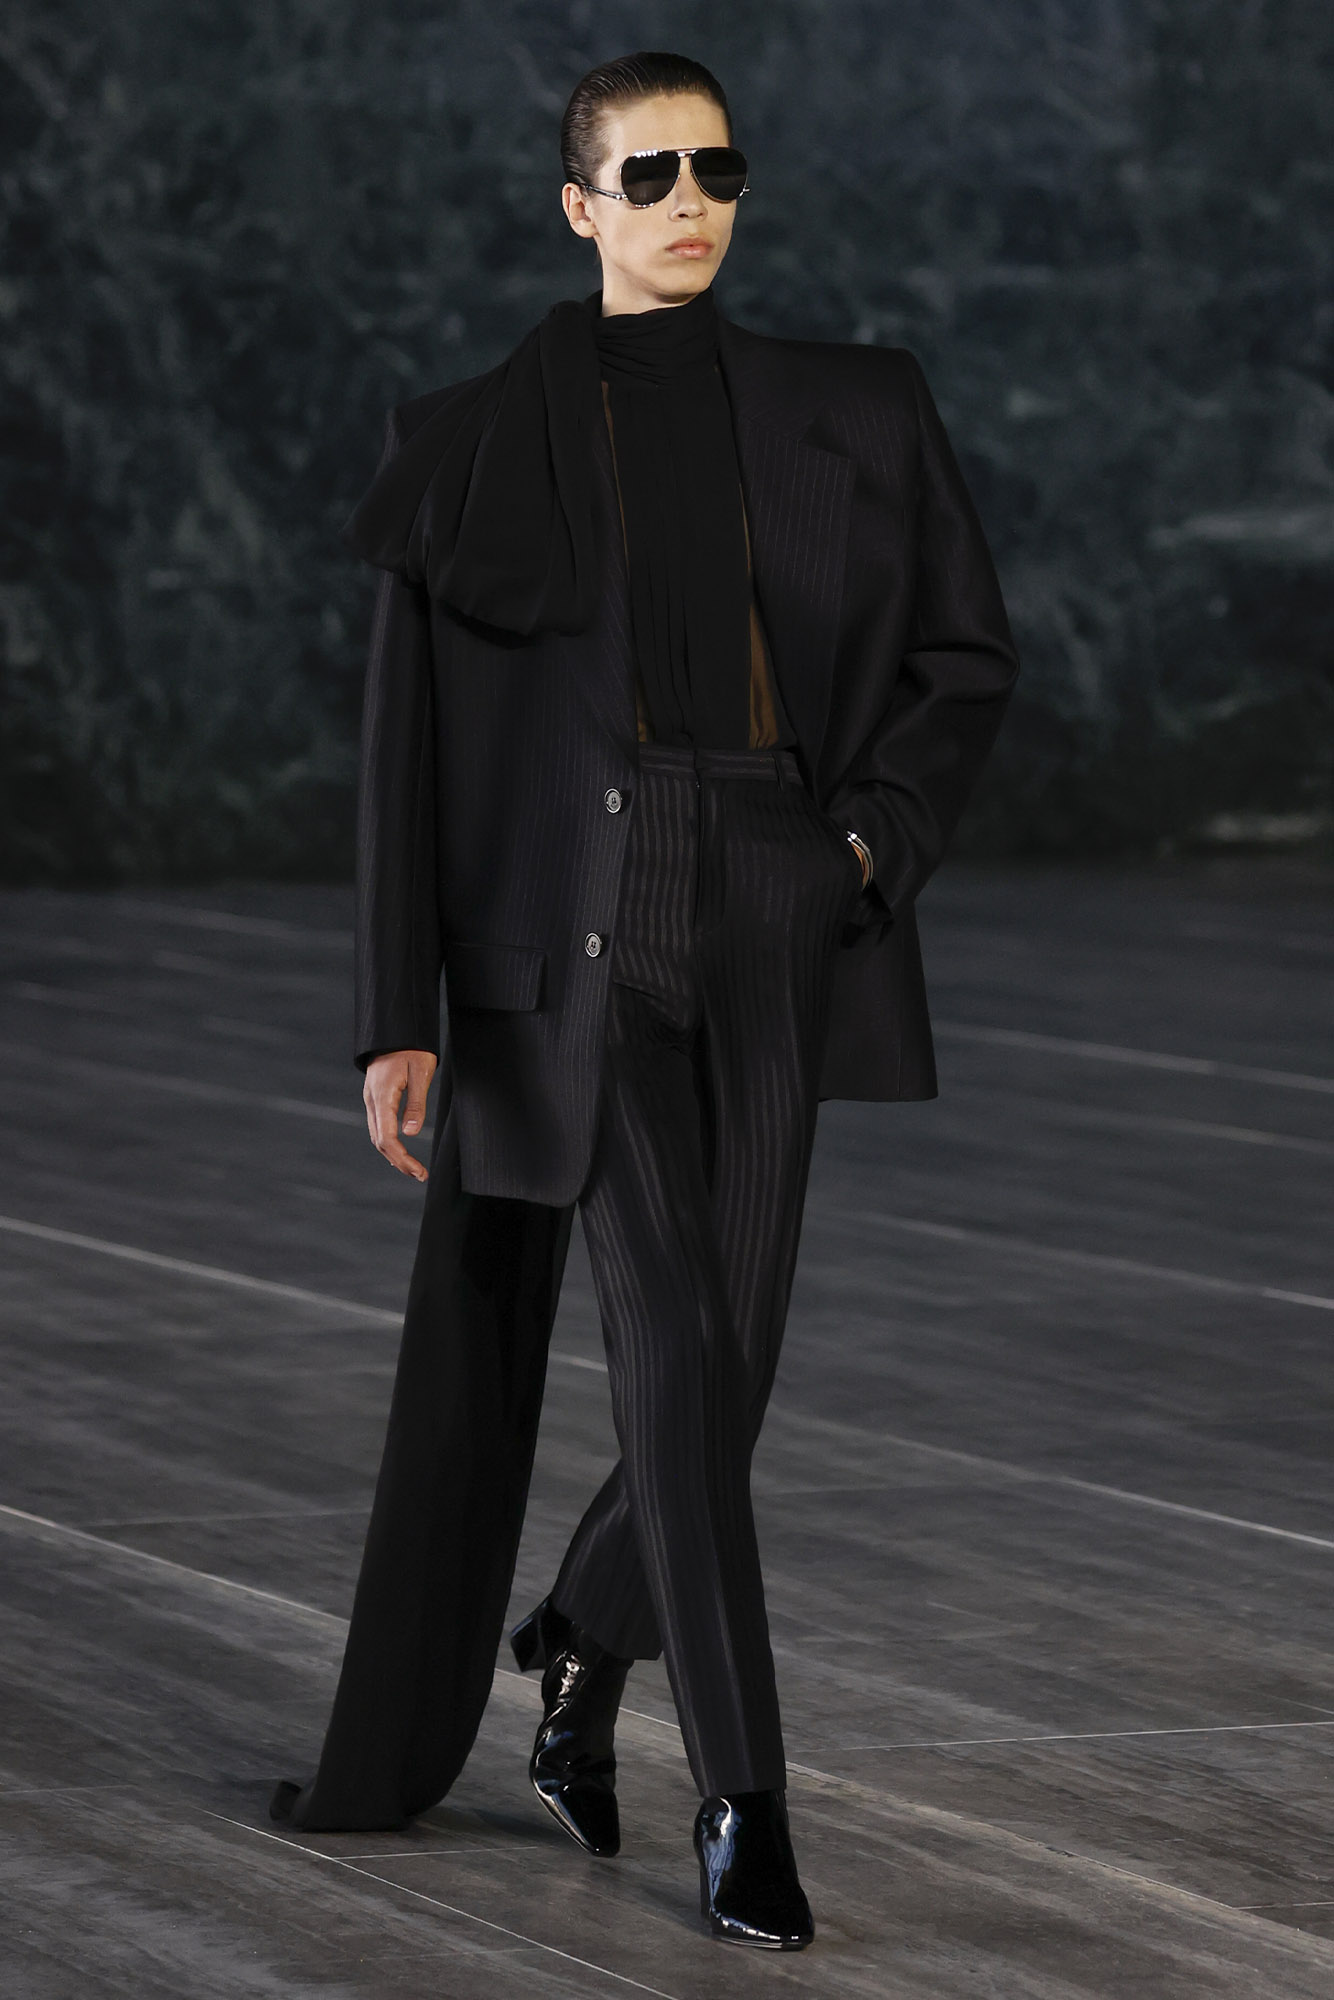 Saint Laurent Spring/Summer 2024 male model in all-black suit draping to the floor on runway